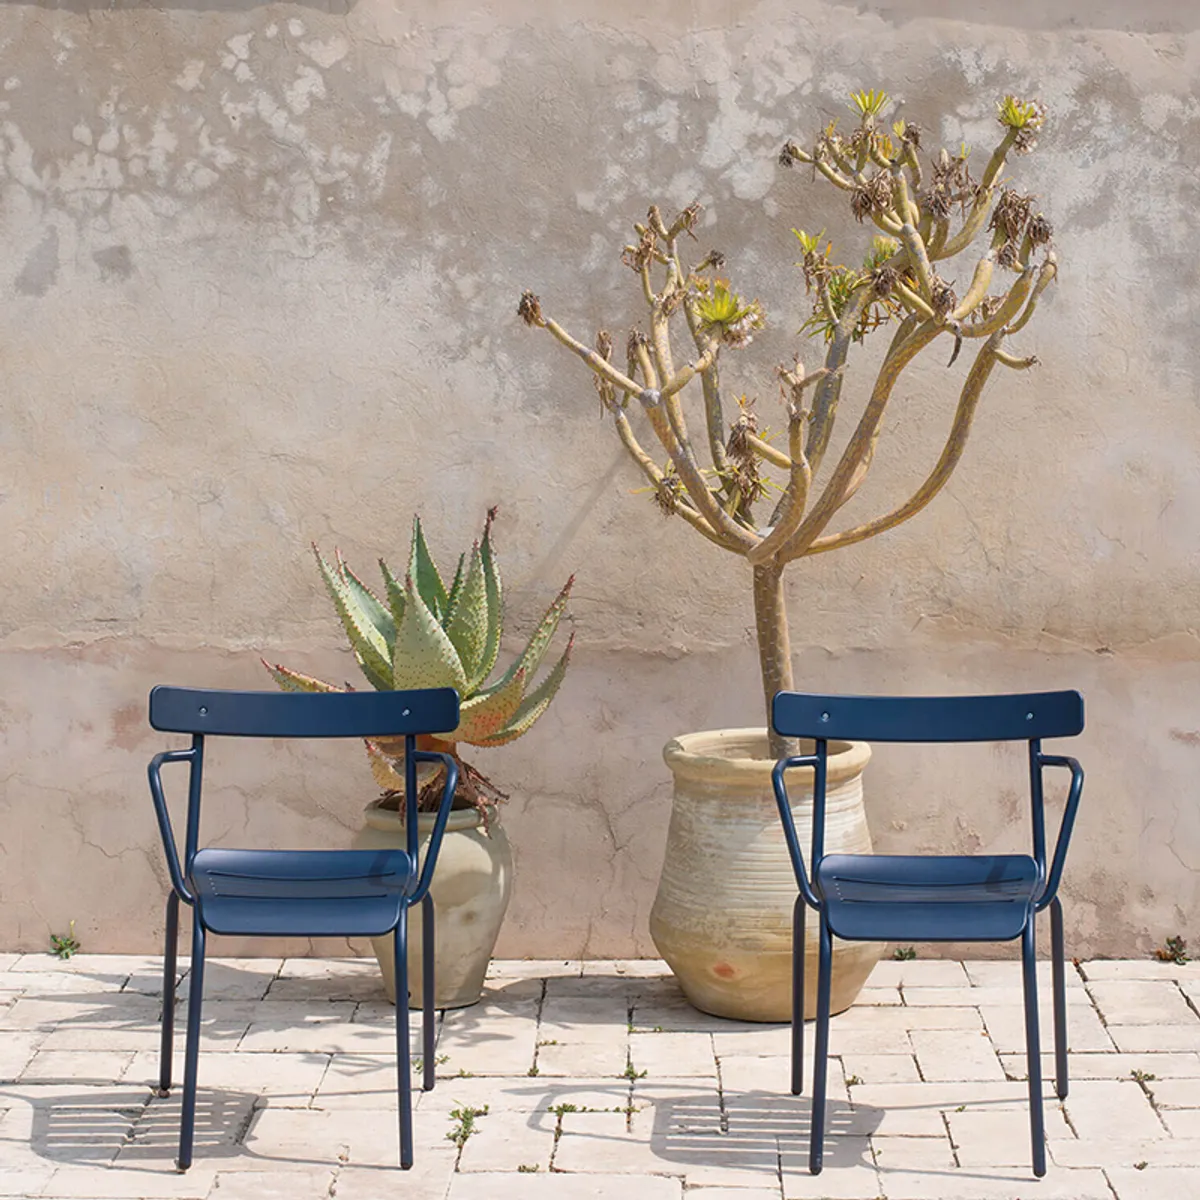 Milky Armchairs In Blue With Terracotta Wall Insideoutcontracts